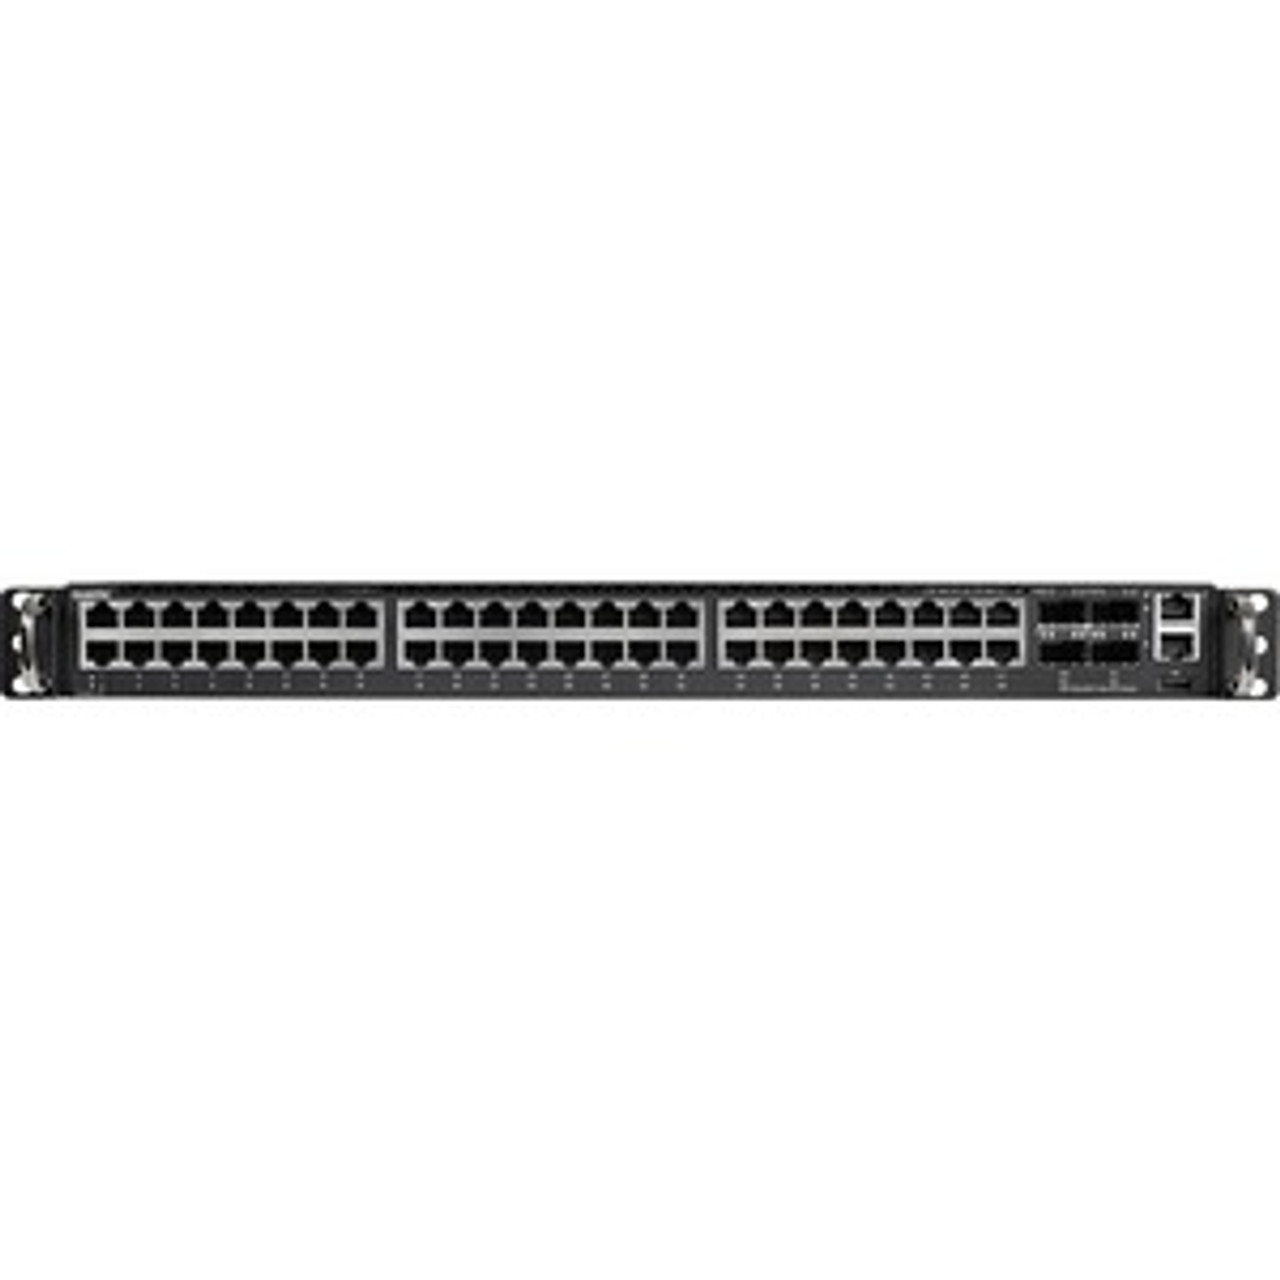 1LY9UZZ000U QCT A Powerful 10GBASE-T Top-of-Rack Switch for Data Center and Cloud Computing - 48 Ports - Manageable - 10 Gigabit Ethernet - 2 Layer Supported -